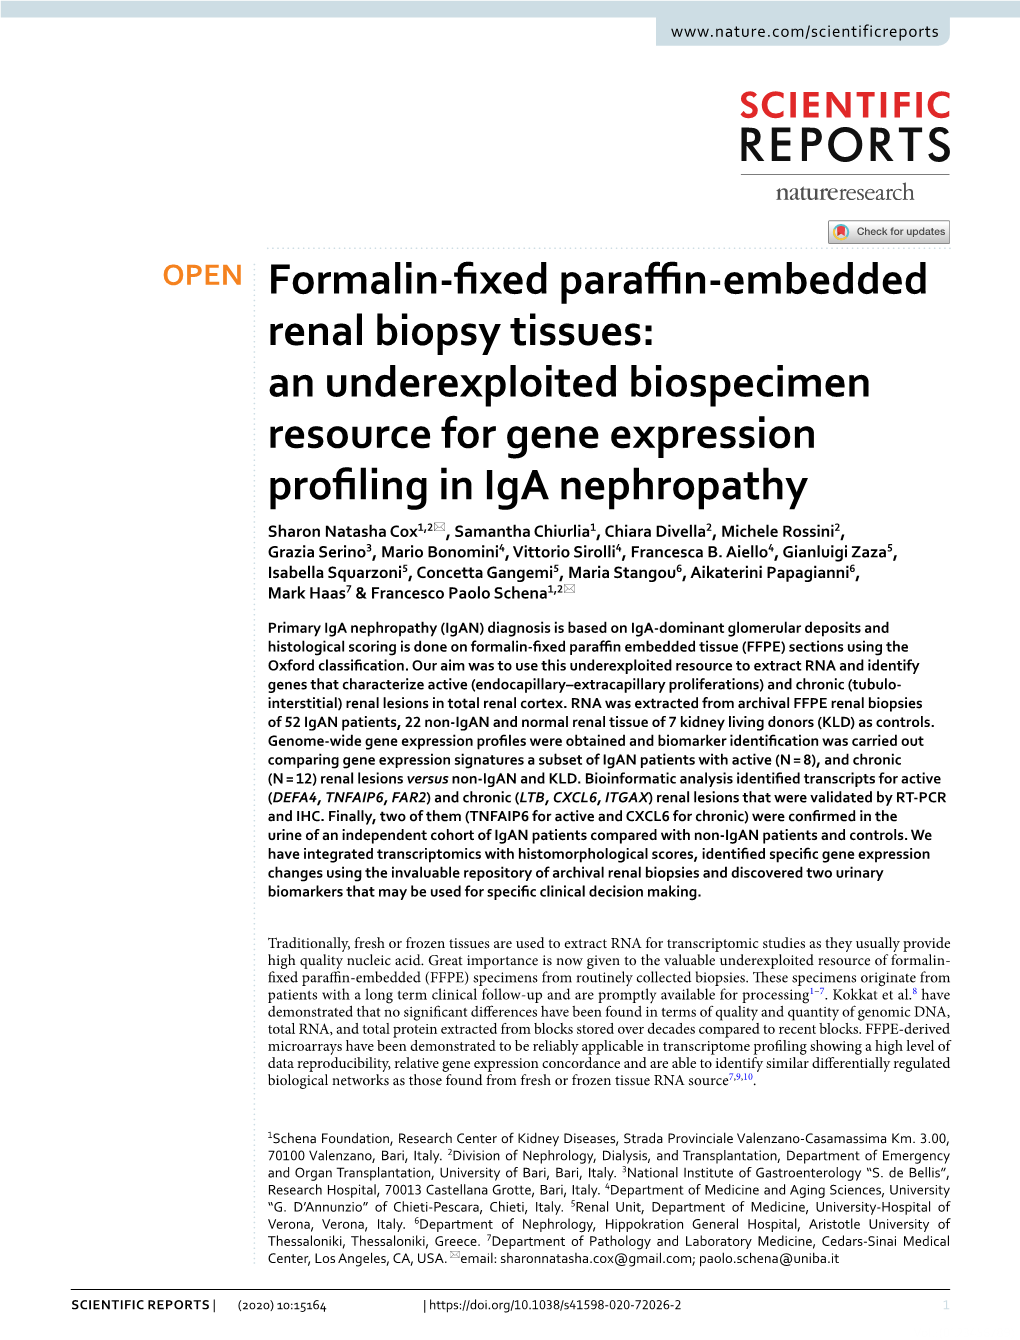 Formalin-Fixed Paraffin-Embedded Renal Biopsy Tissues: An